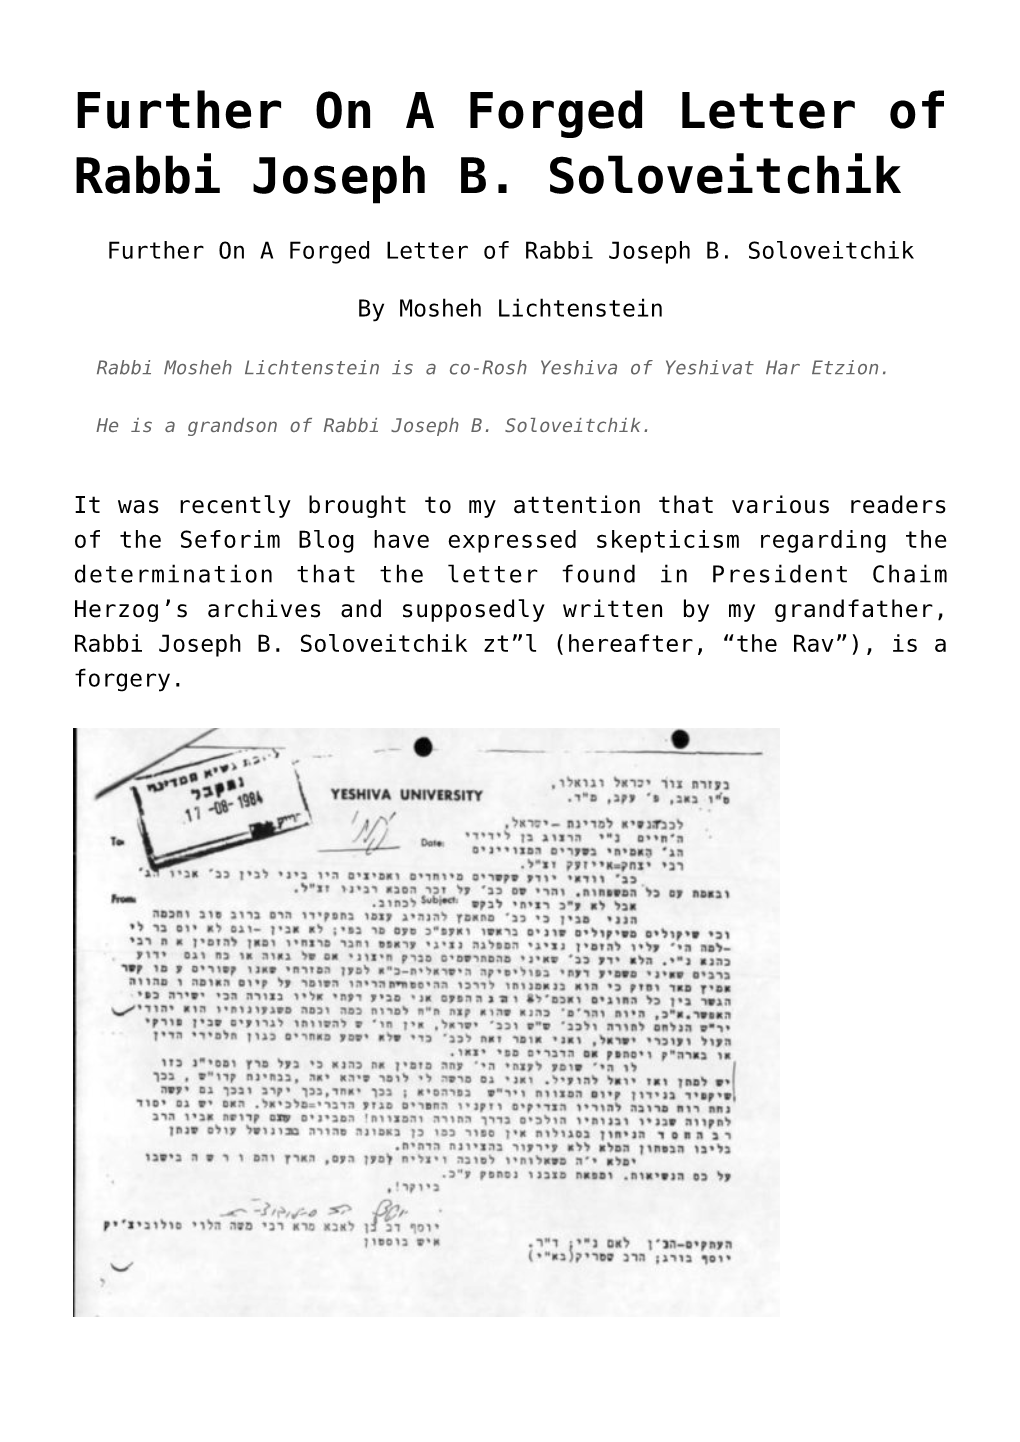 Further on a Forged Letter of Rabbi Joseph B. Soloveitchik